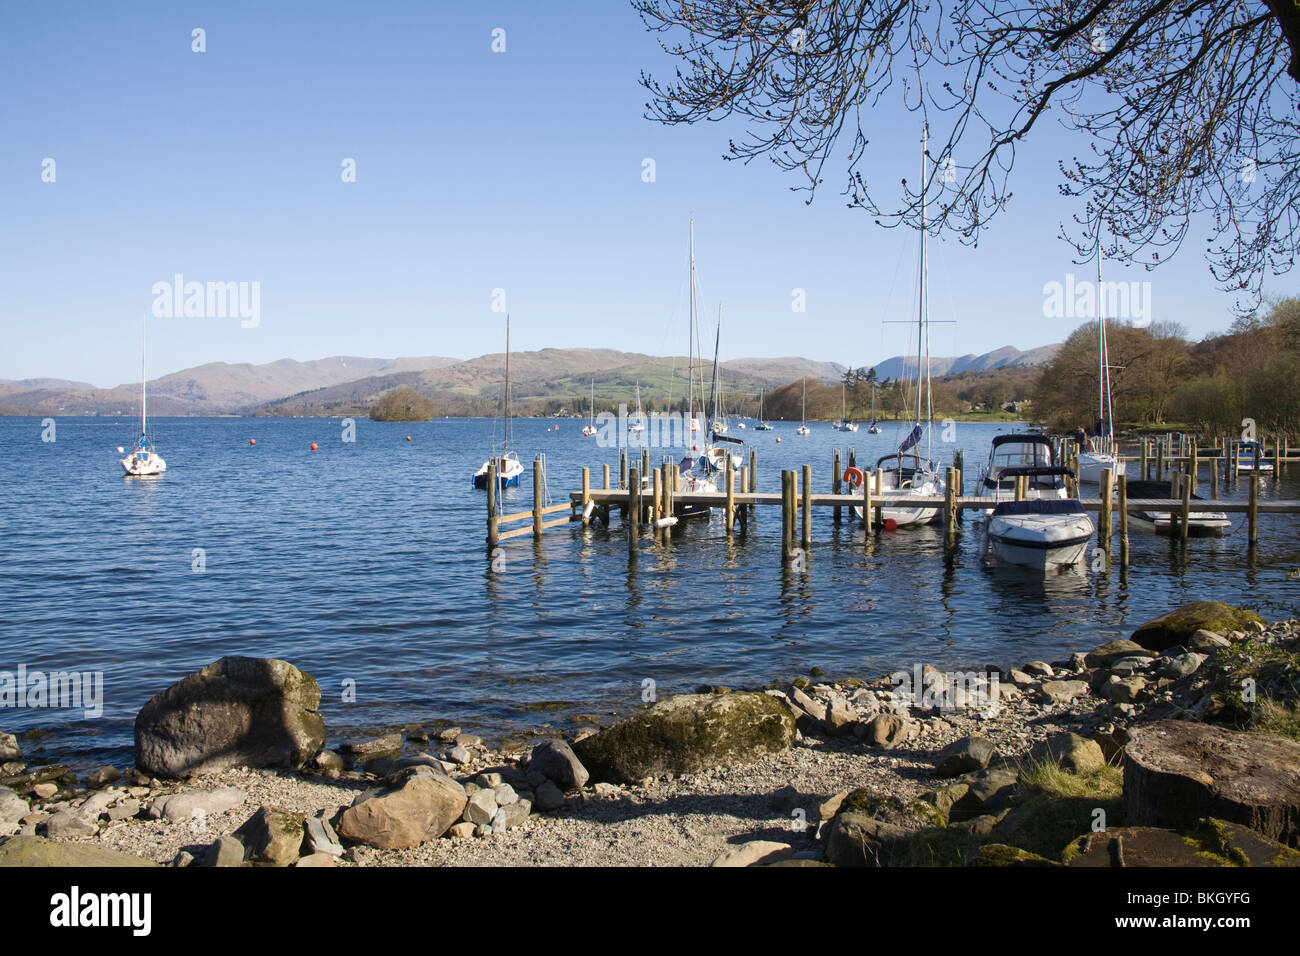 Lake District Cumbria UK April Looking across yachts moored on Lake Windermere towards Loughrigg Fell Stock Photo